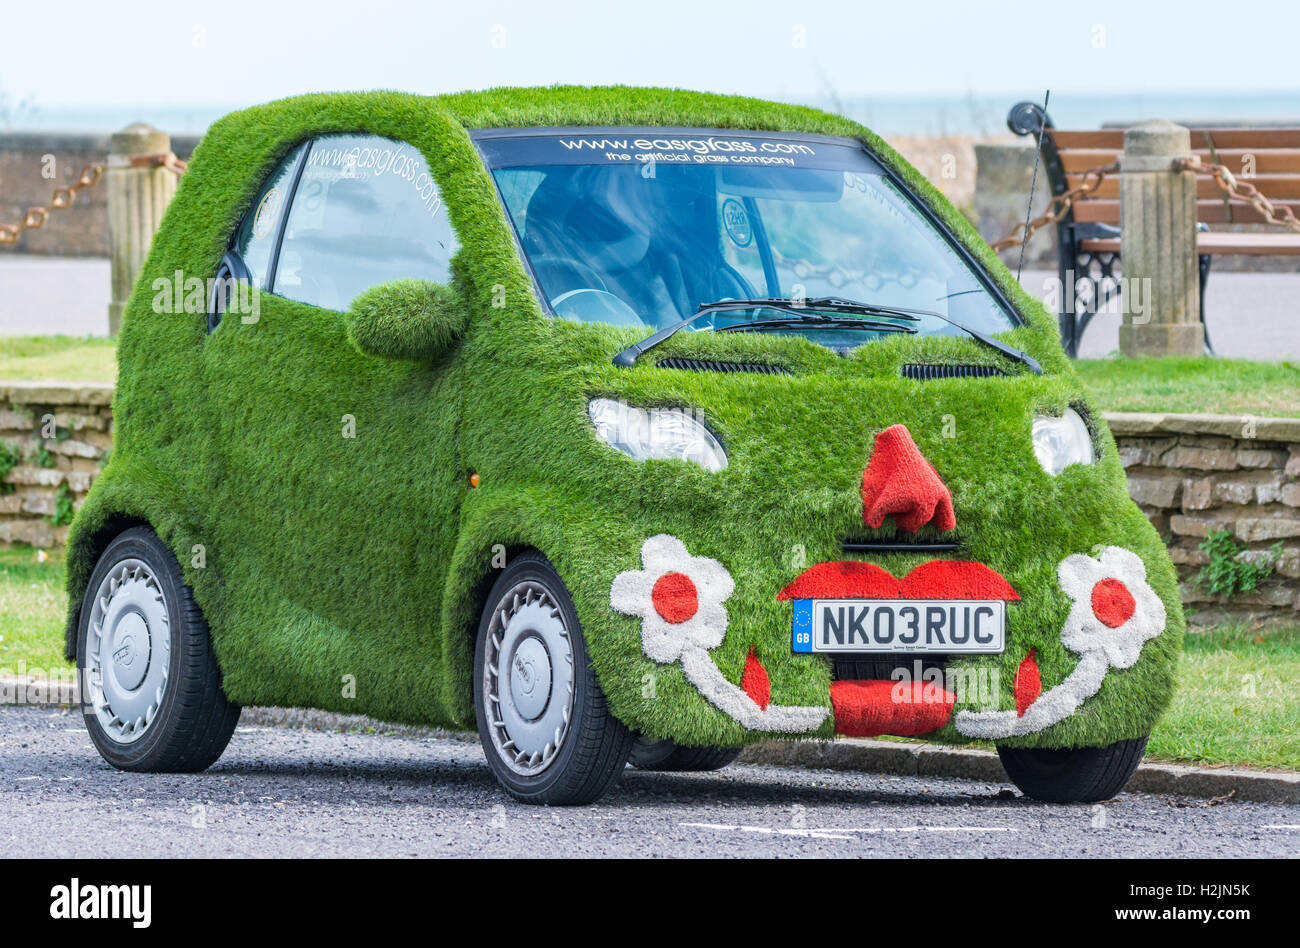 Unique Easigrass Easibug smartcar parked on a road. Stock Photo